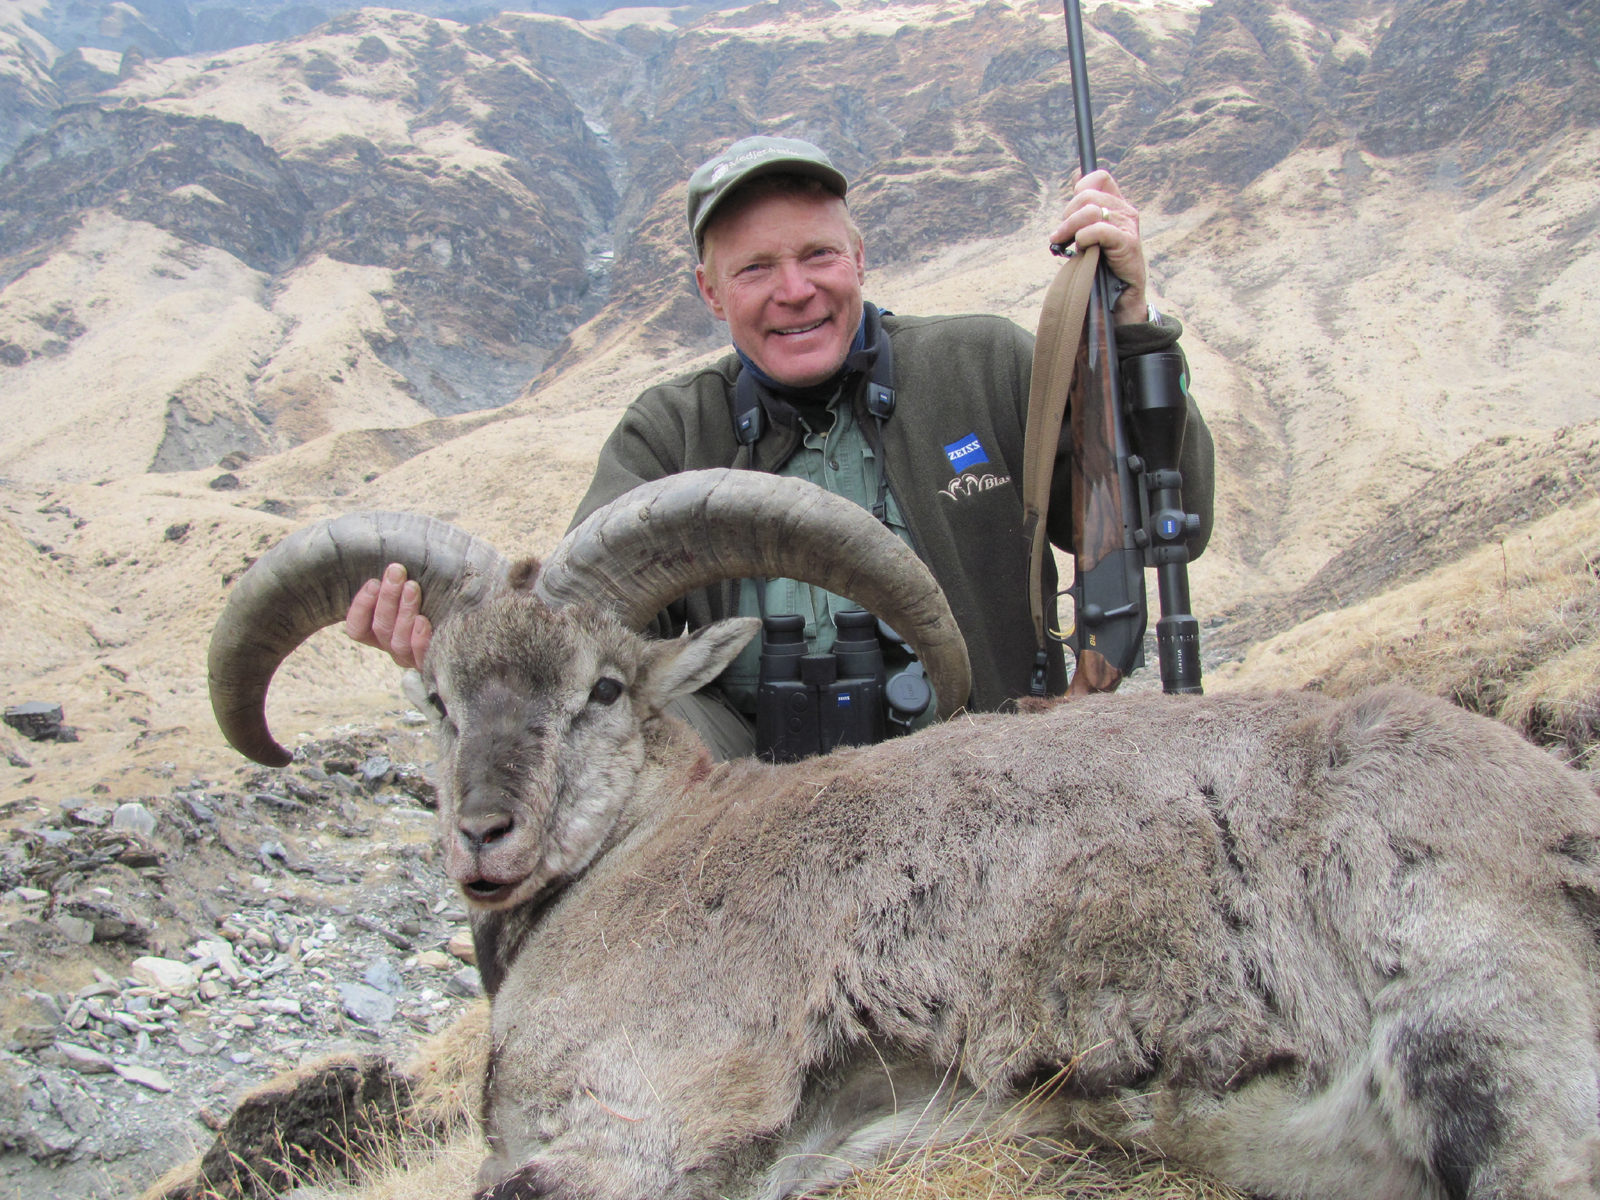 This excellent Himalayan blue sheep was taken in Nepal with a .300 Blaser Magnum barrel mounted with a Victory 3-12x56mm scope, distance about 515 yards. Both this scope and the Zeiss 10x45 RF binoculars became a favorite combo for mountain hunting.